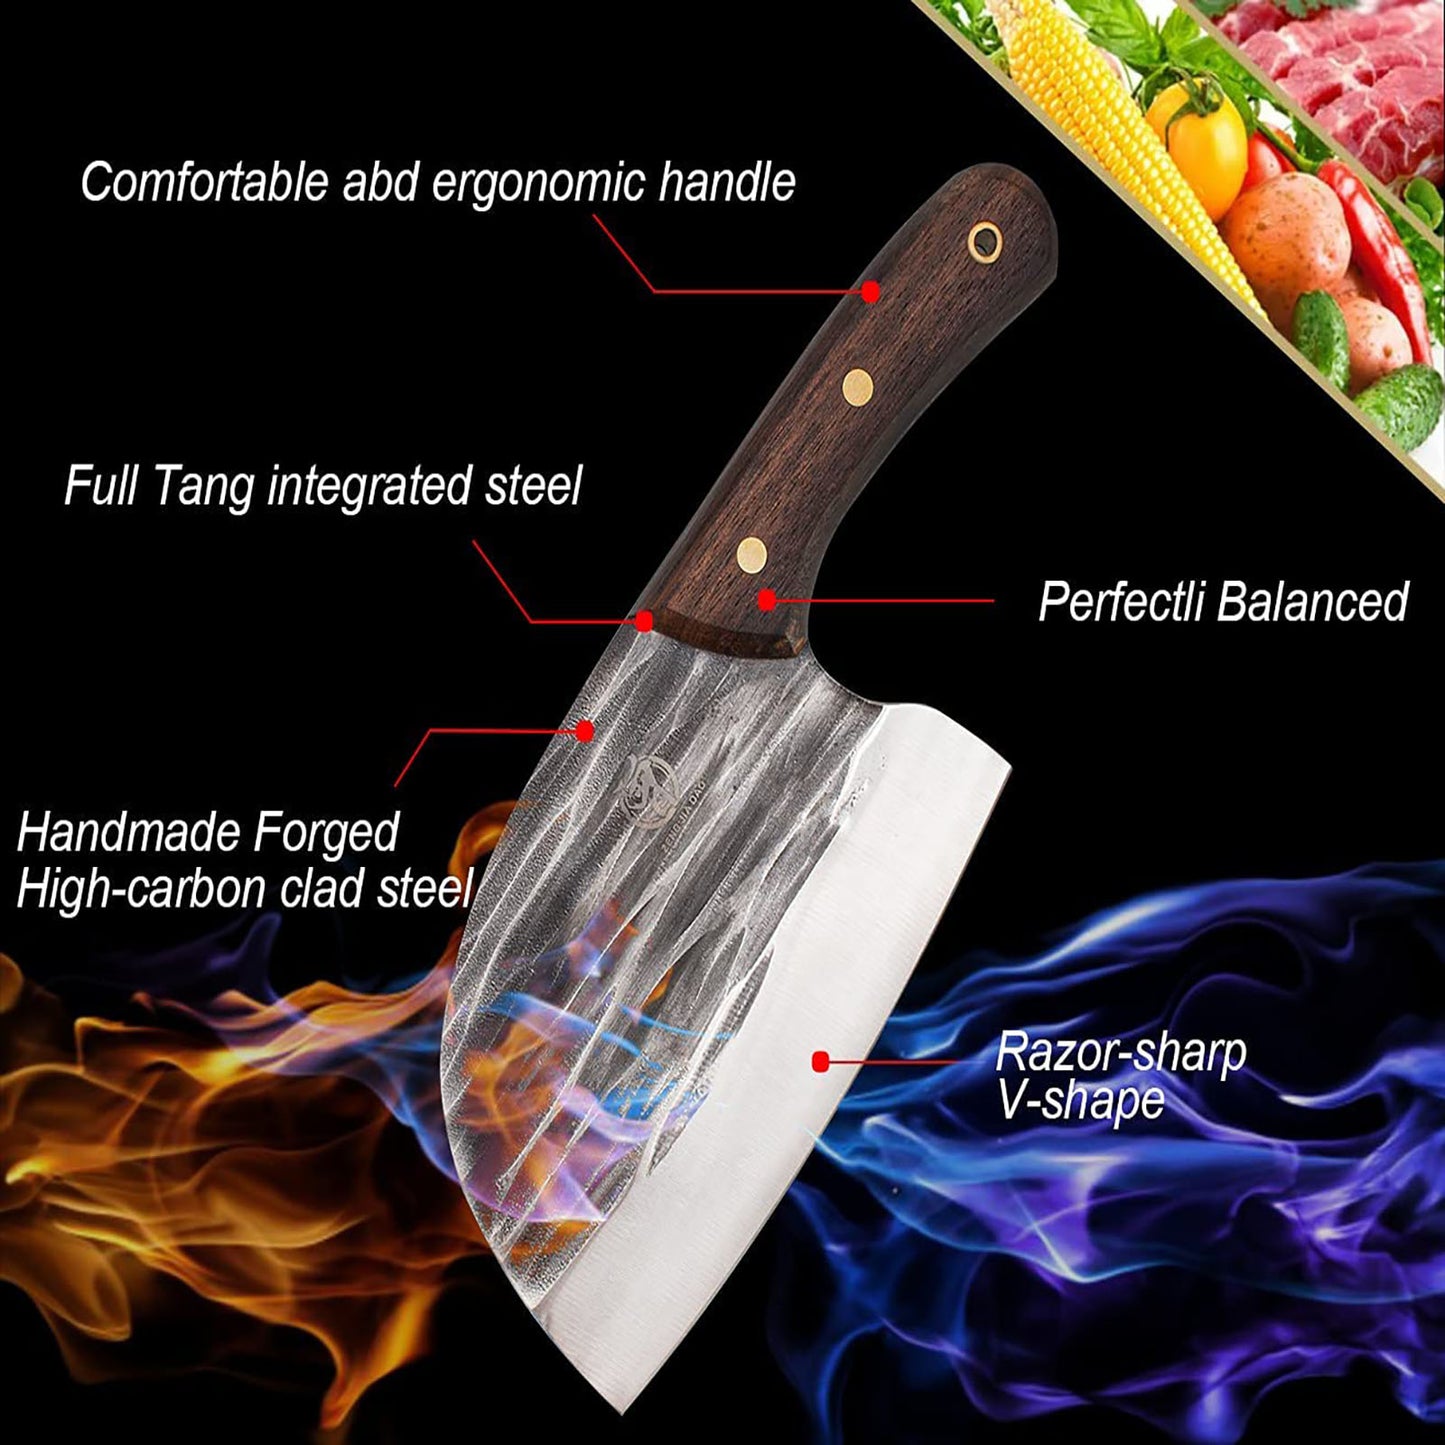 ZENG JIA DAO Forged Kitchen Cleaver 6 Inch Full Tang High Carbon Steel